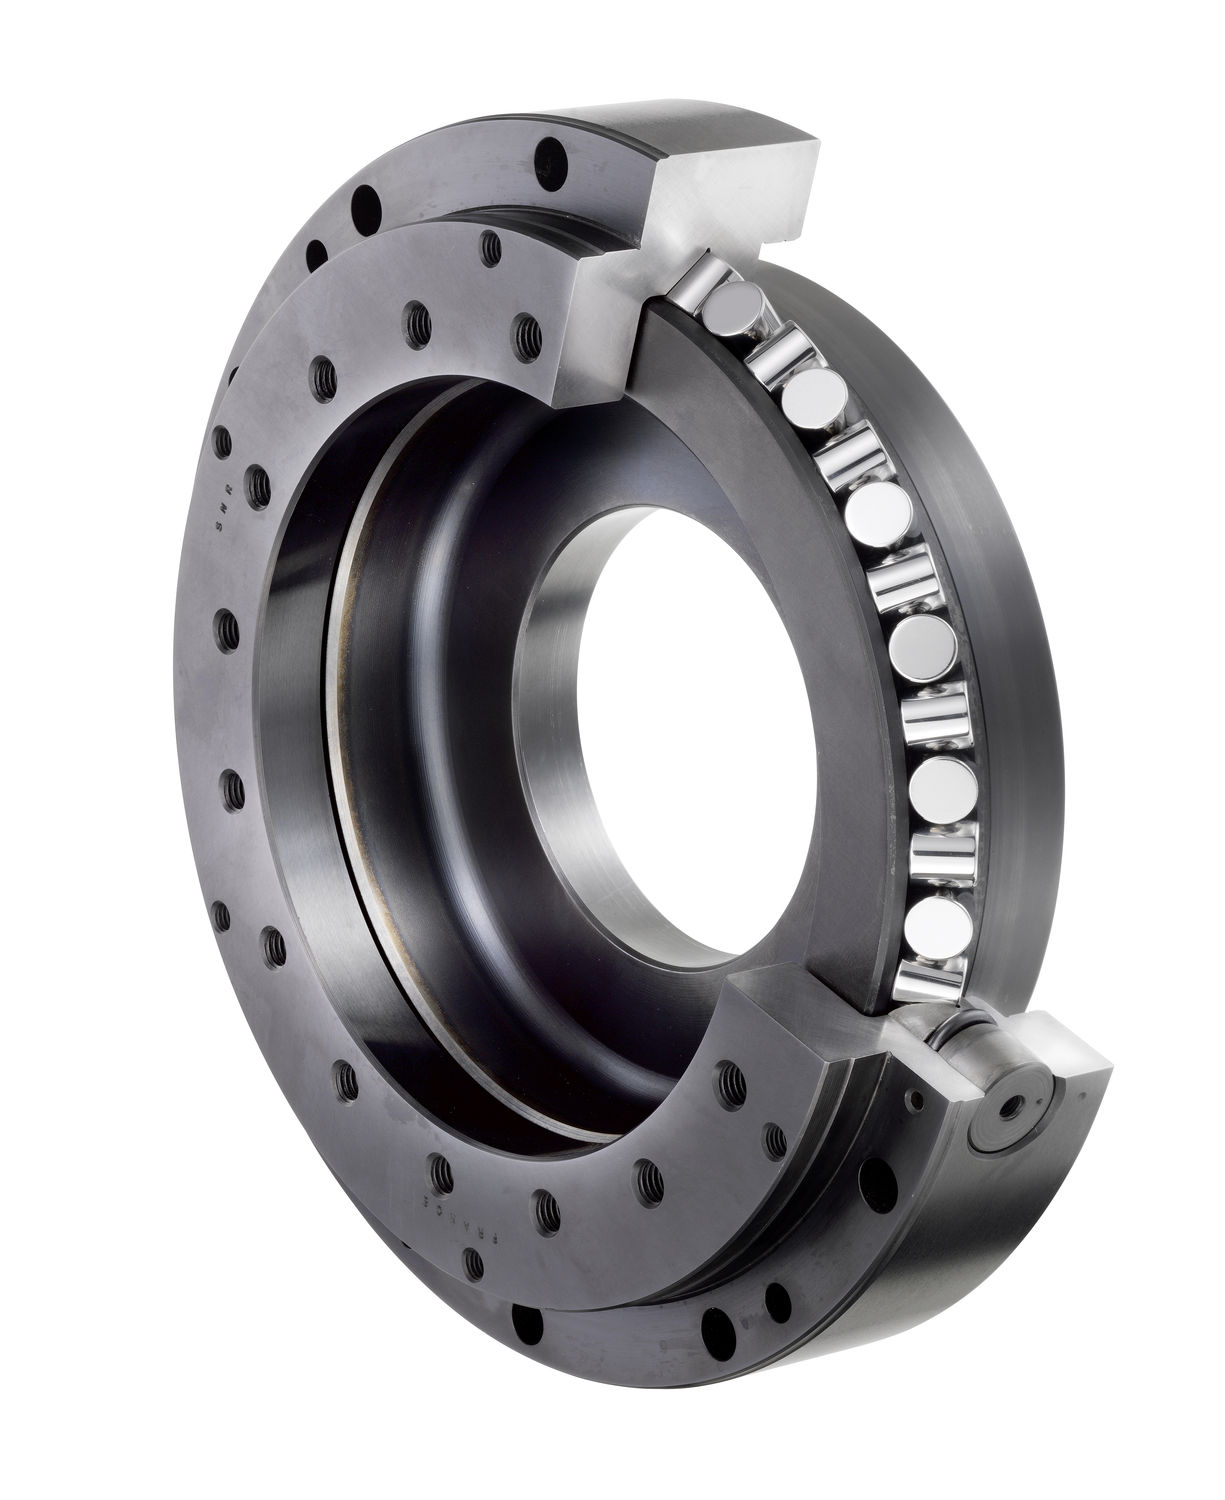 bulk axial and radial bearing yrtm with angle measuring system